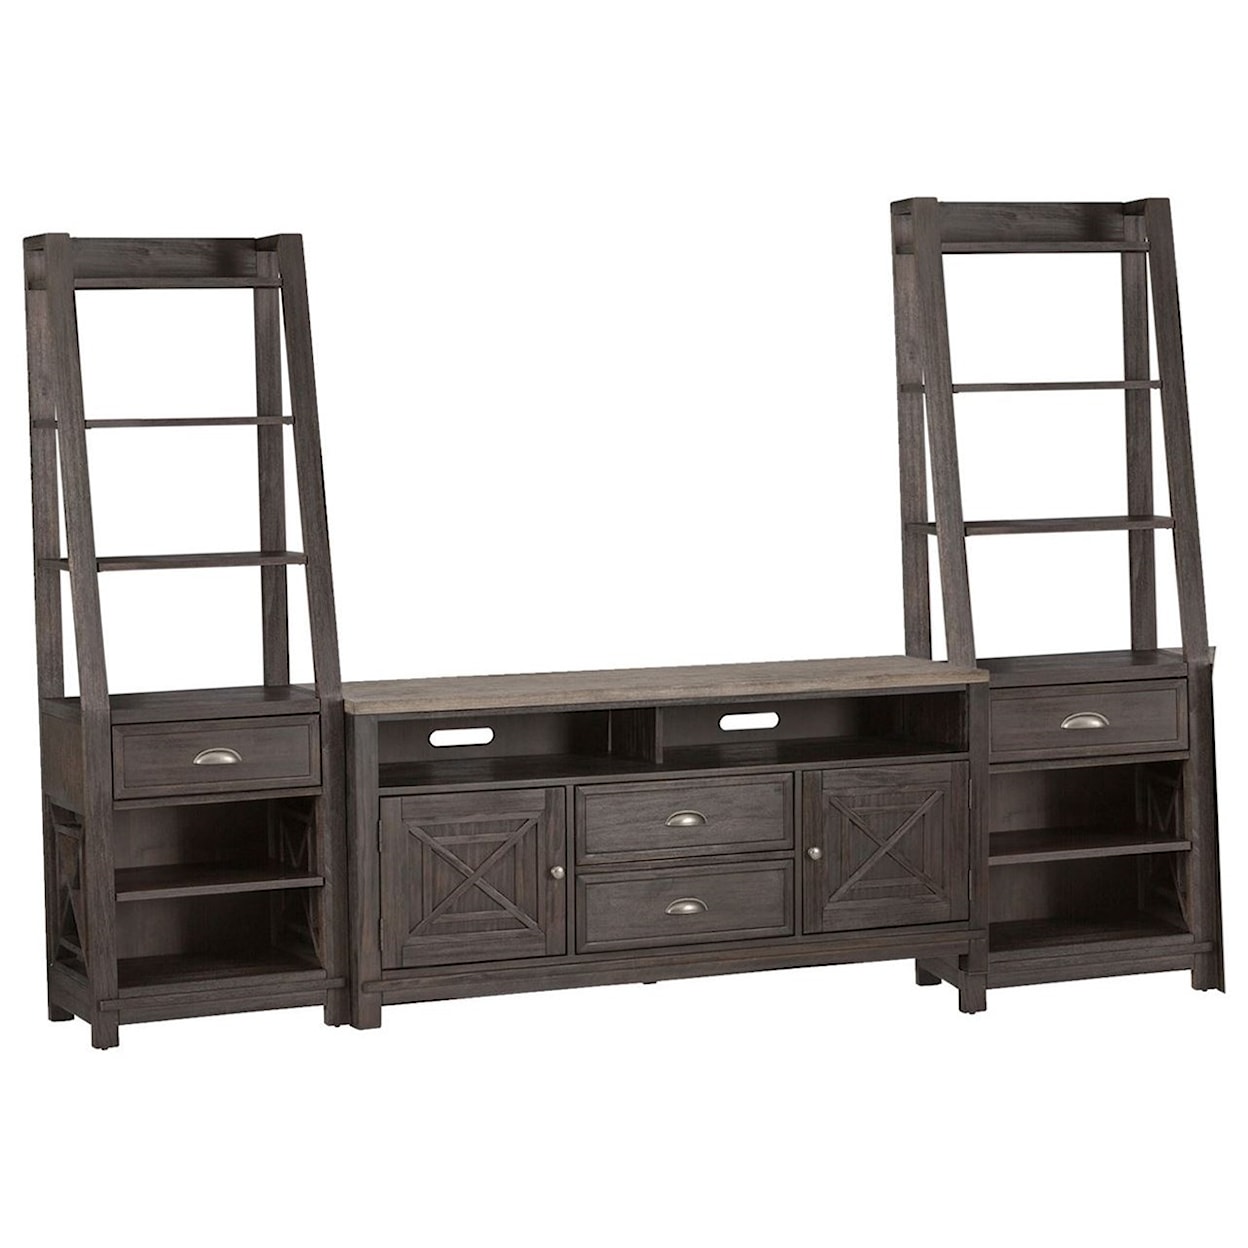 Libby Heatherbrook Entertainment Center with Piers